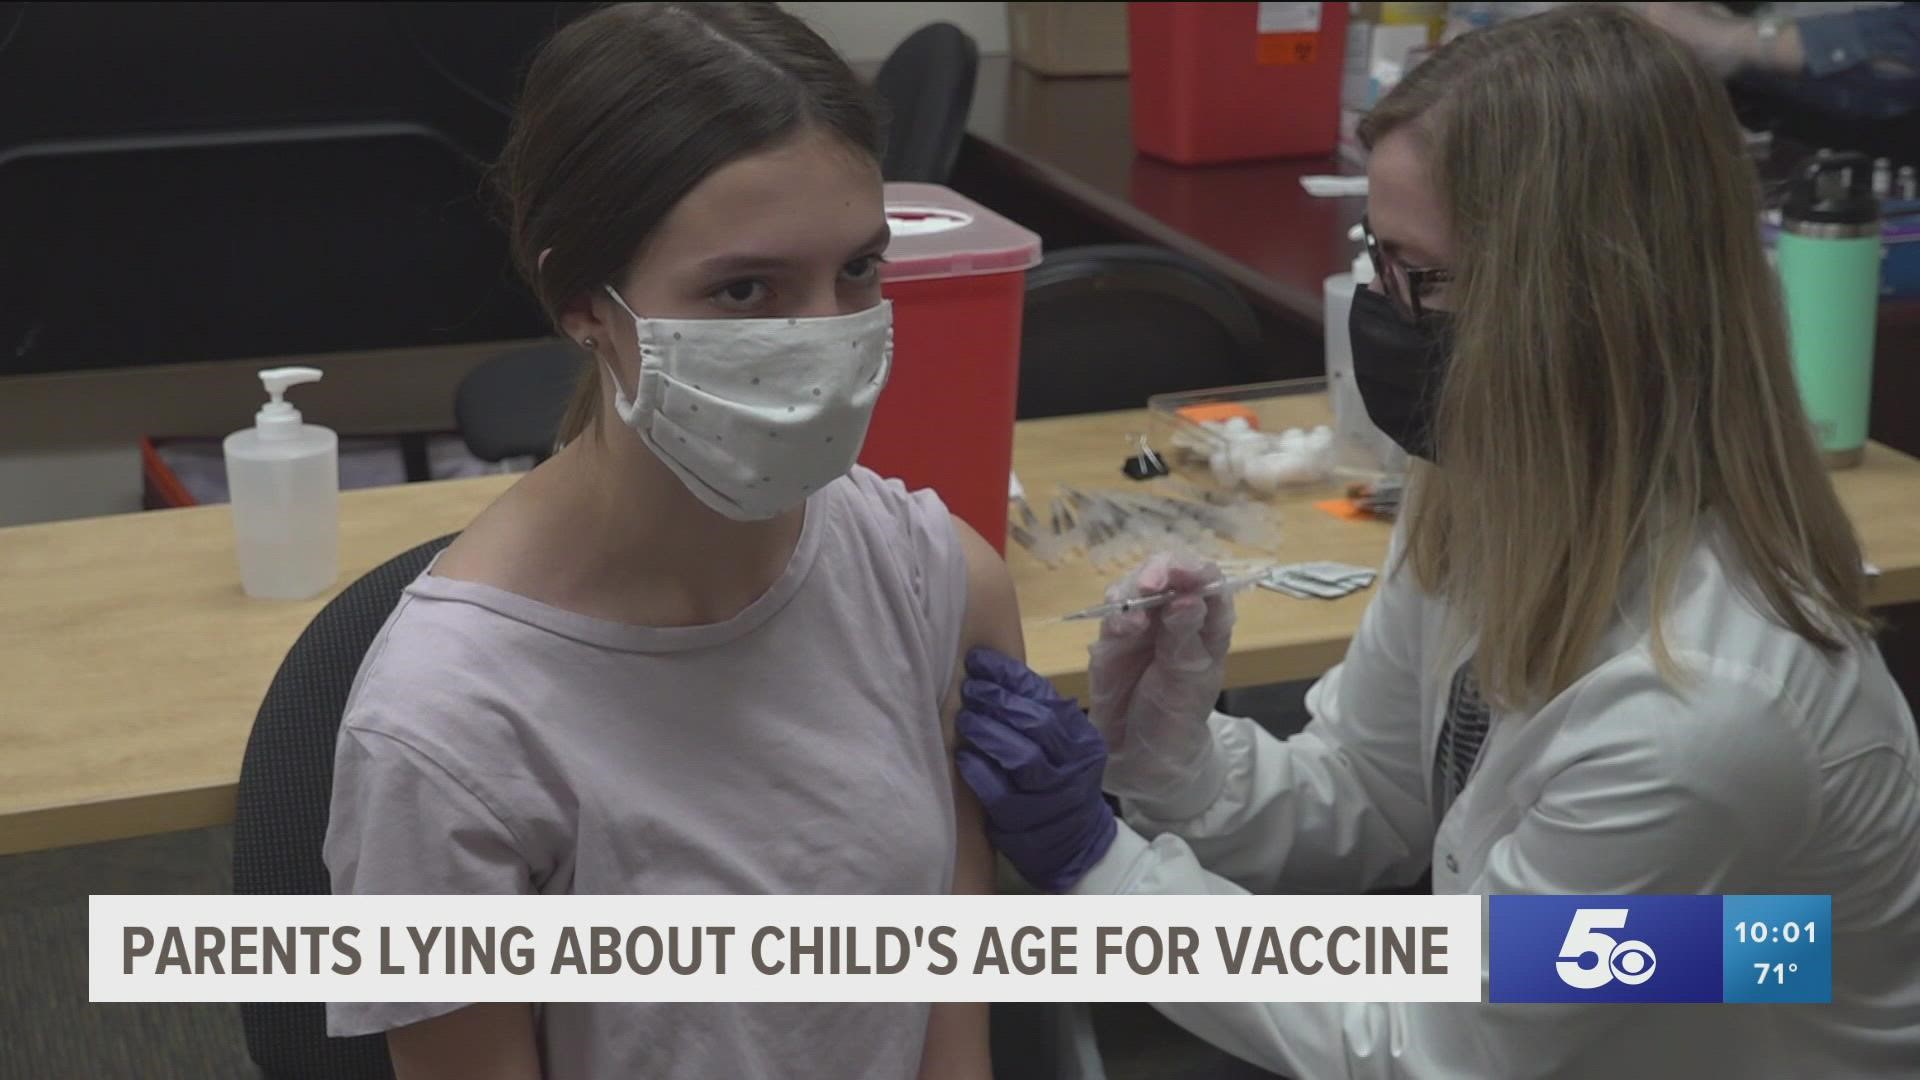 According to Medical Arts Pharmacy in Fayetteville, some Arkansas parents have been lying about their child’s age to get them vaccinated ahead of the new school year